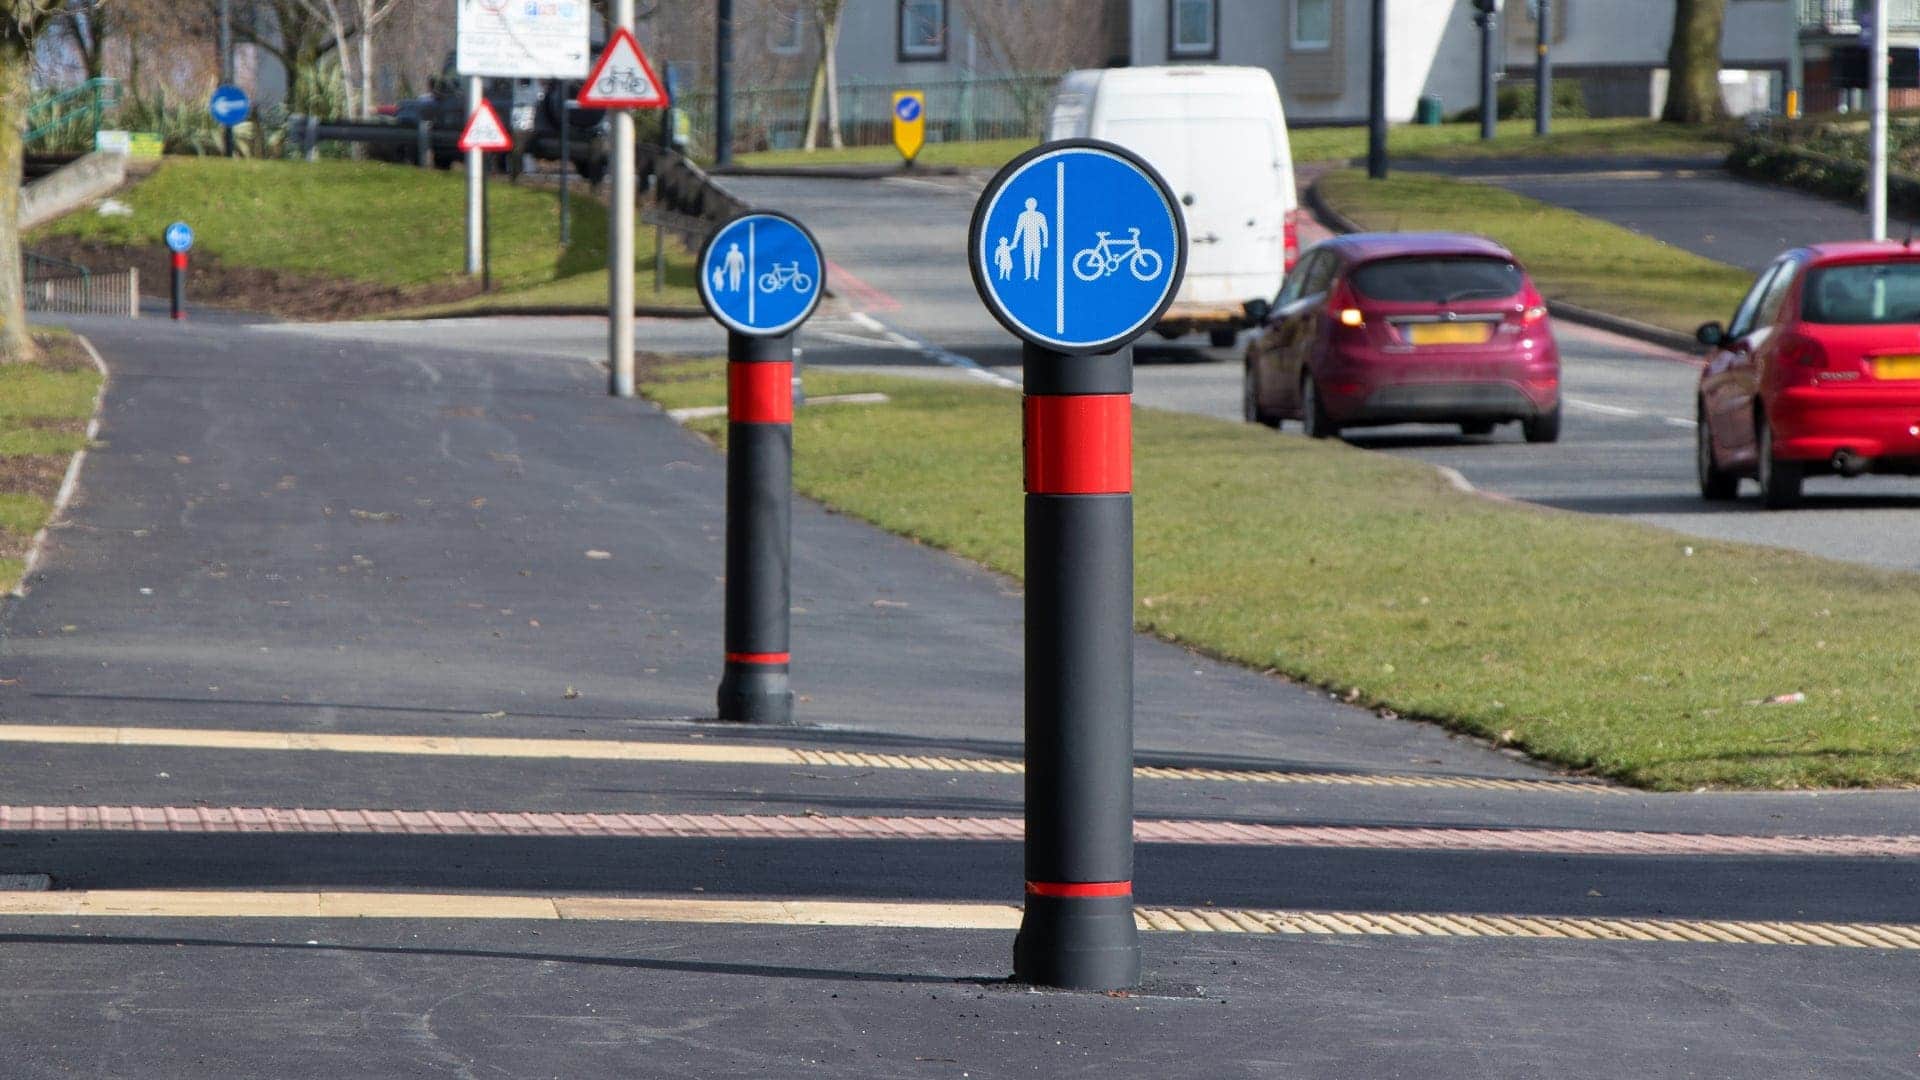 Tmp Pictor bollards used in Sandwell cycle scheme